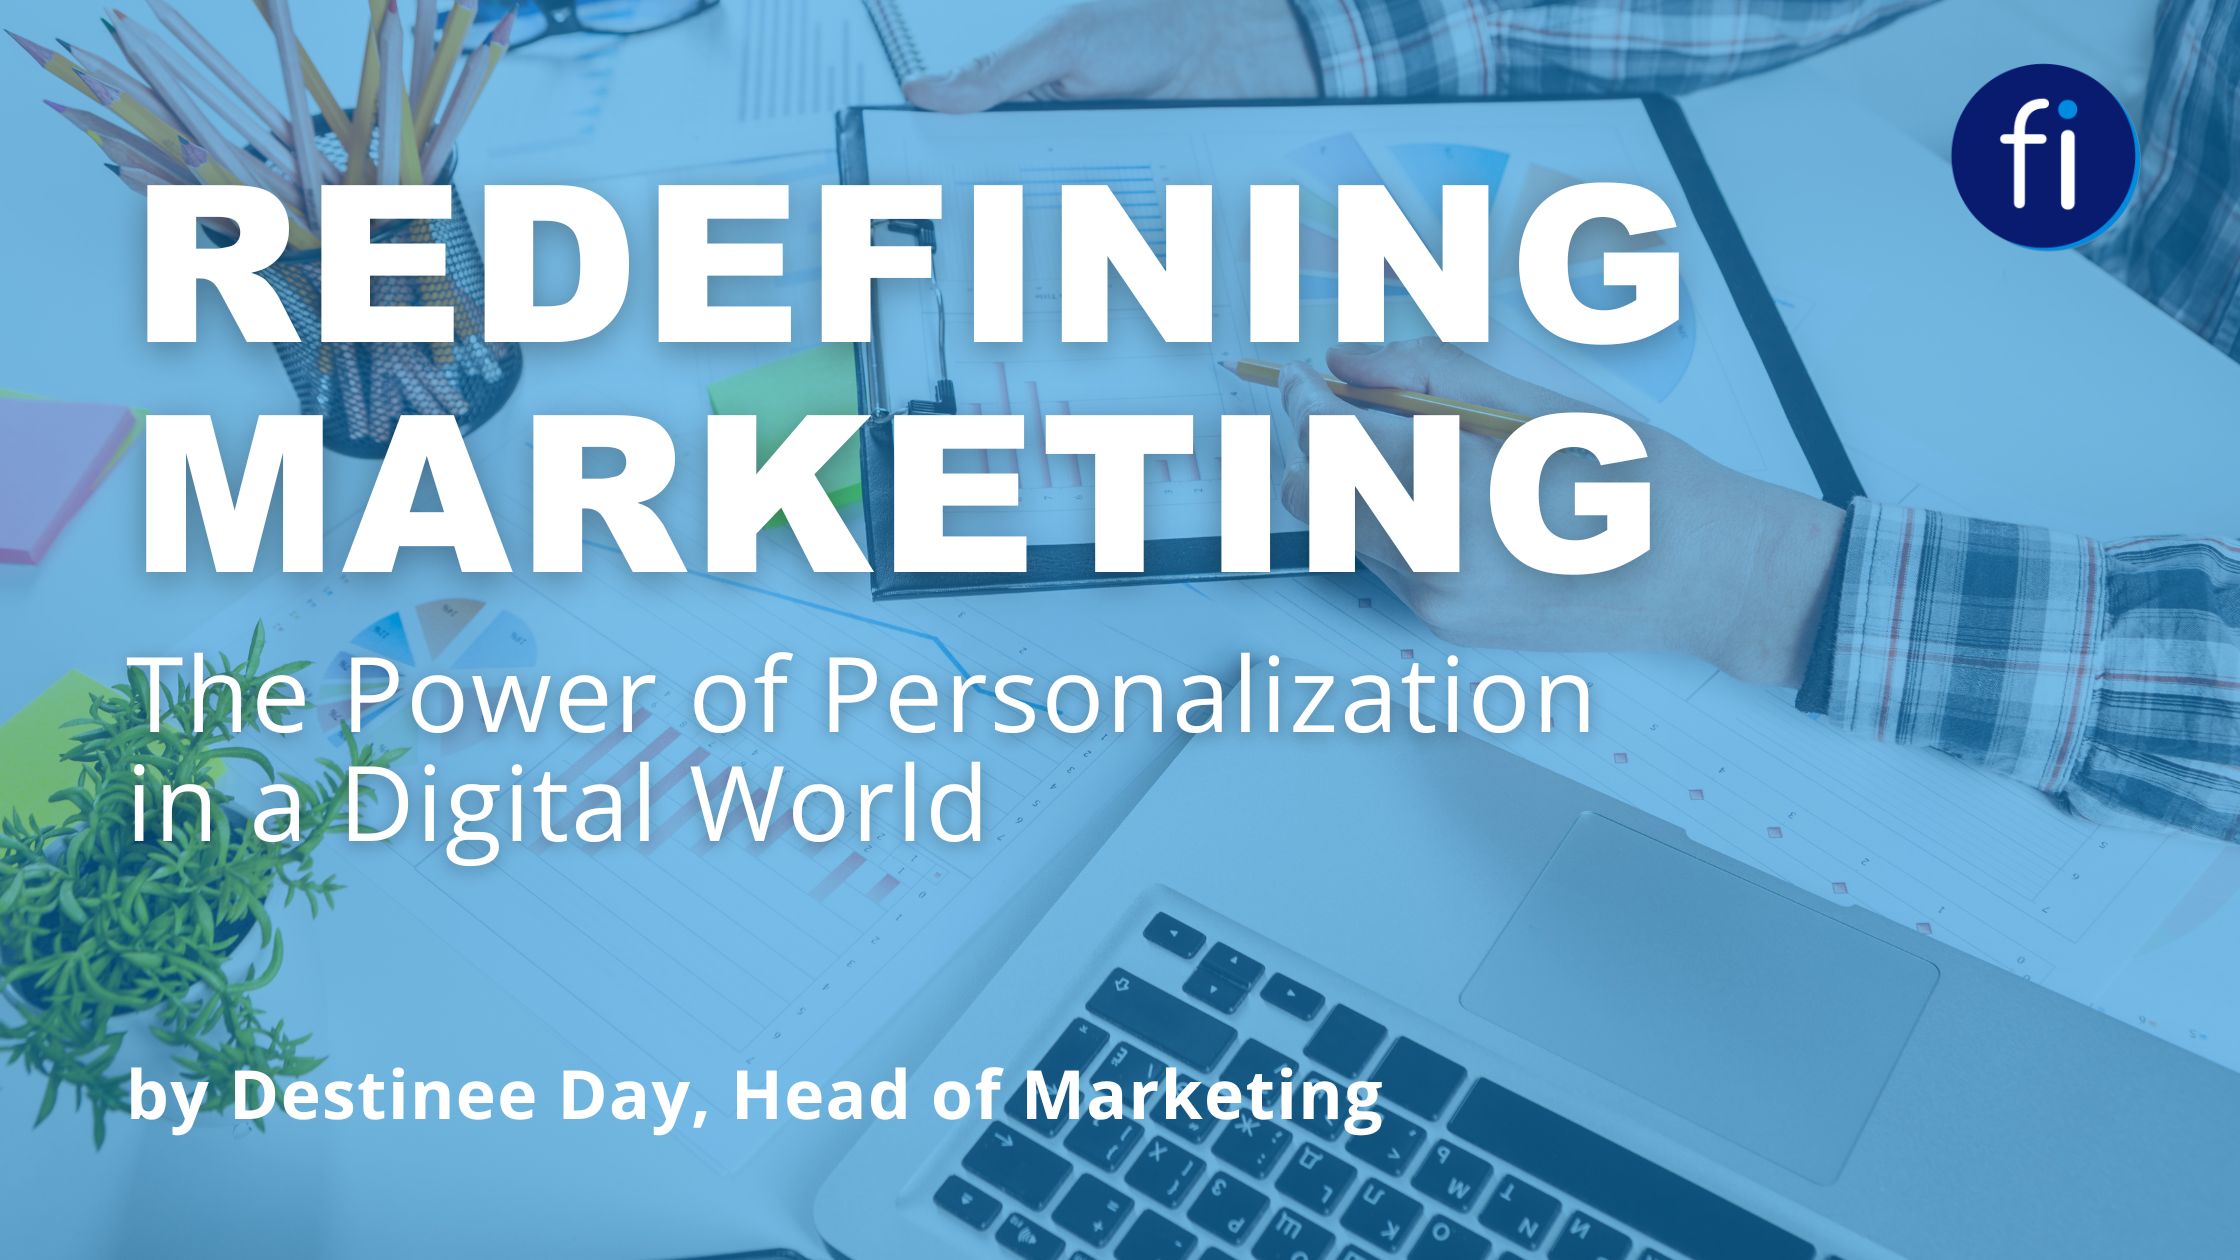 Redefining Marketing: The Power of Personalization in a Digital World